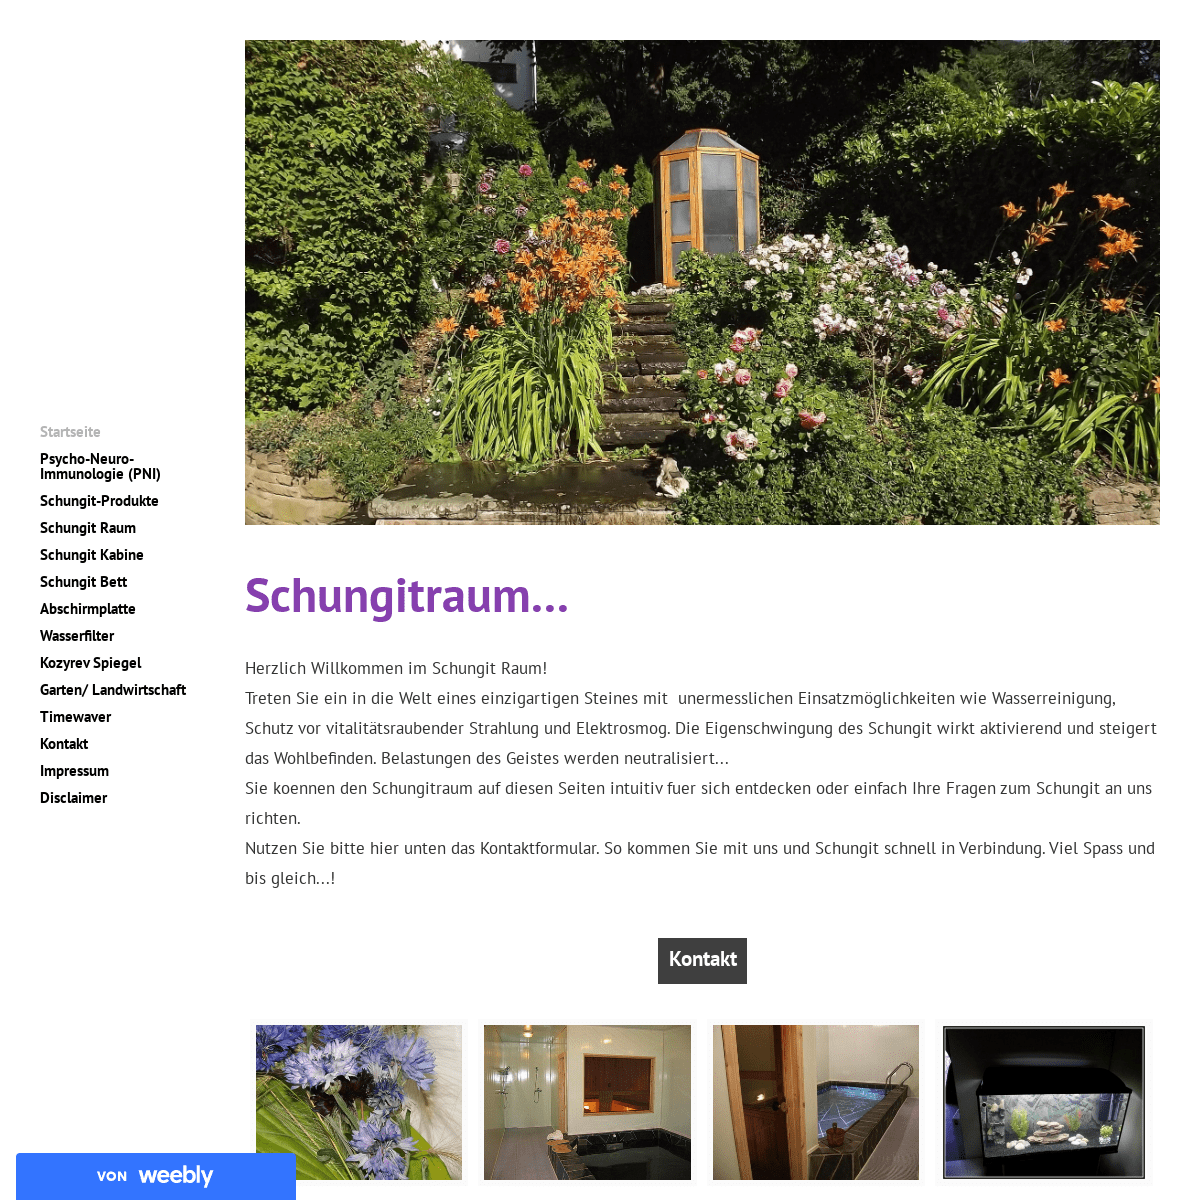 A complete backup of schungitraum.weebly.com